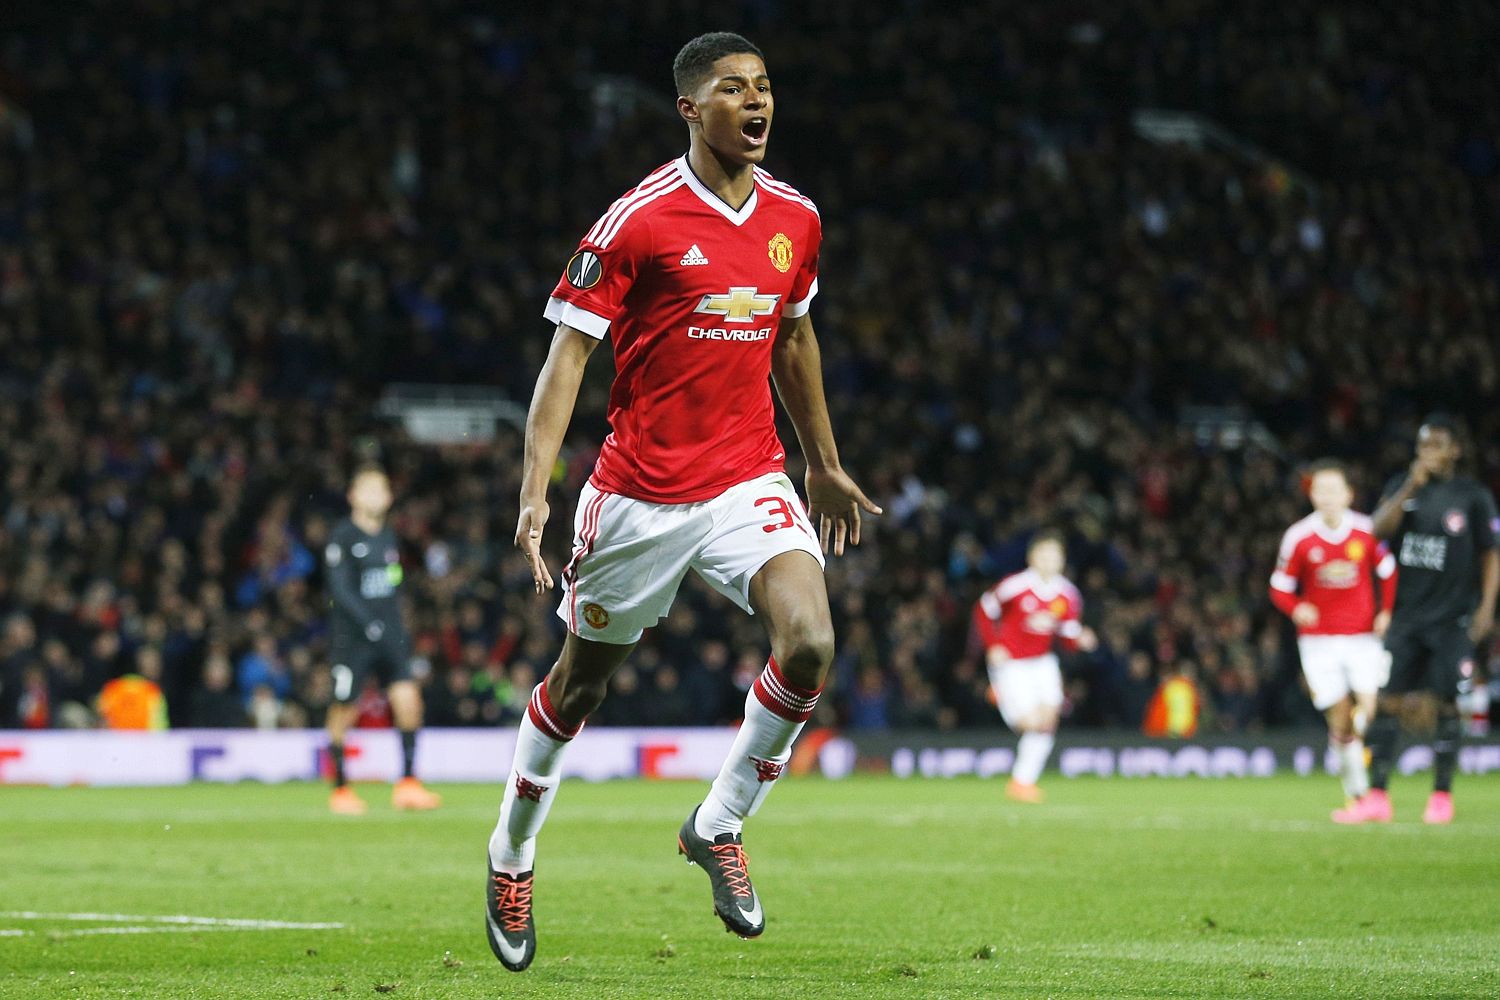 Marcus Rashford celebrates after scoring a goal for Manchester United.